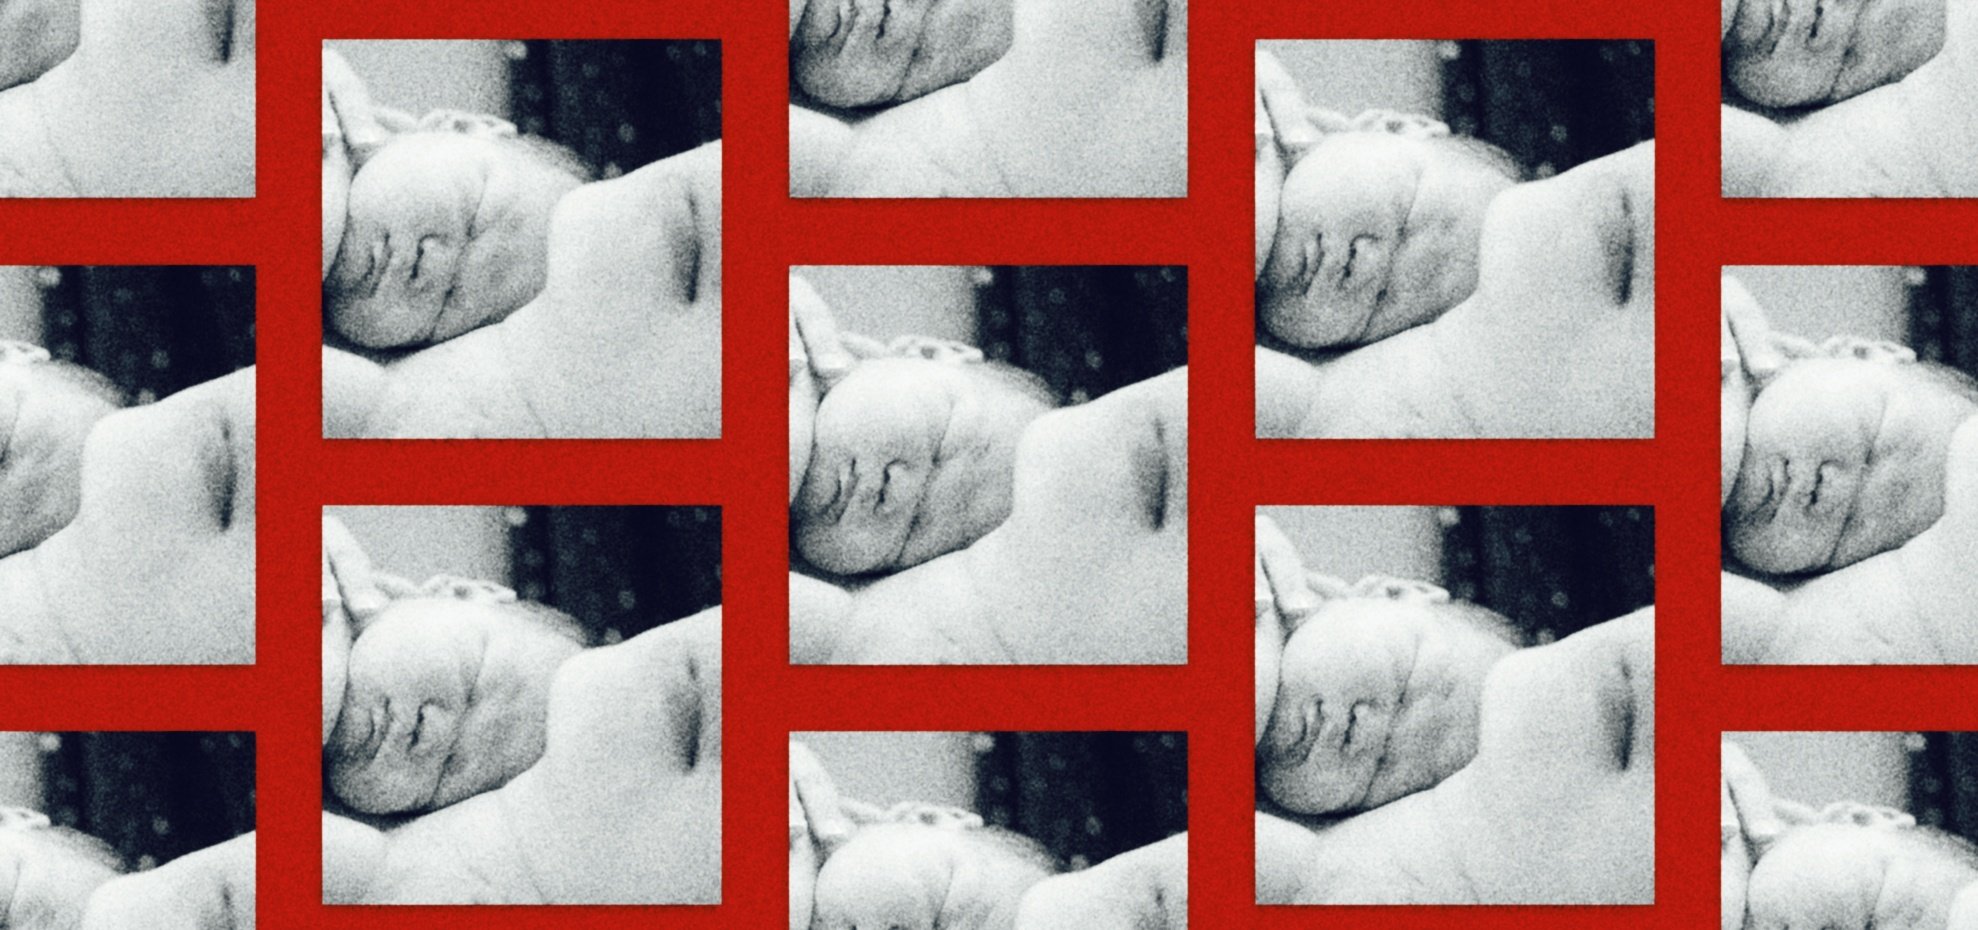 Black-and-white images of a baby on a red background